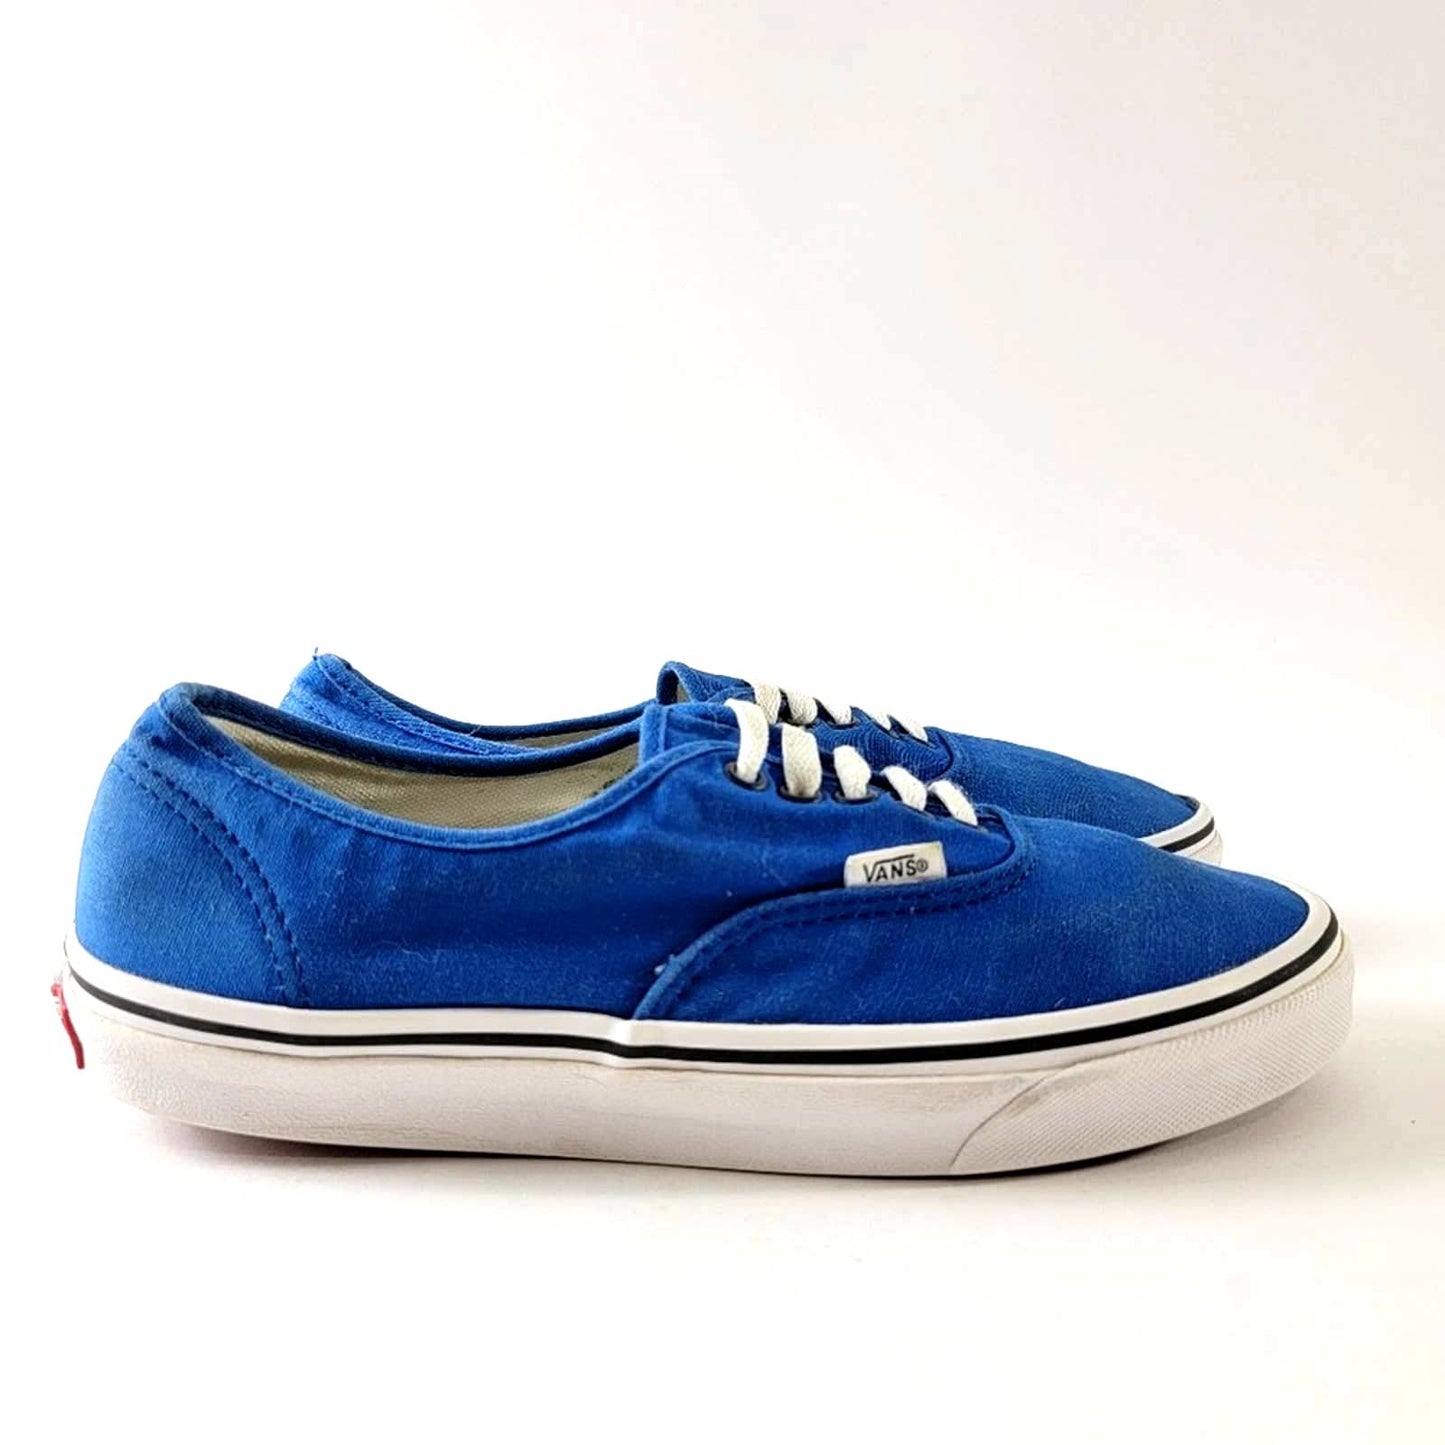 Vans Atwood Classic Lace Up Low Top Sneakers - 9.5/11